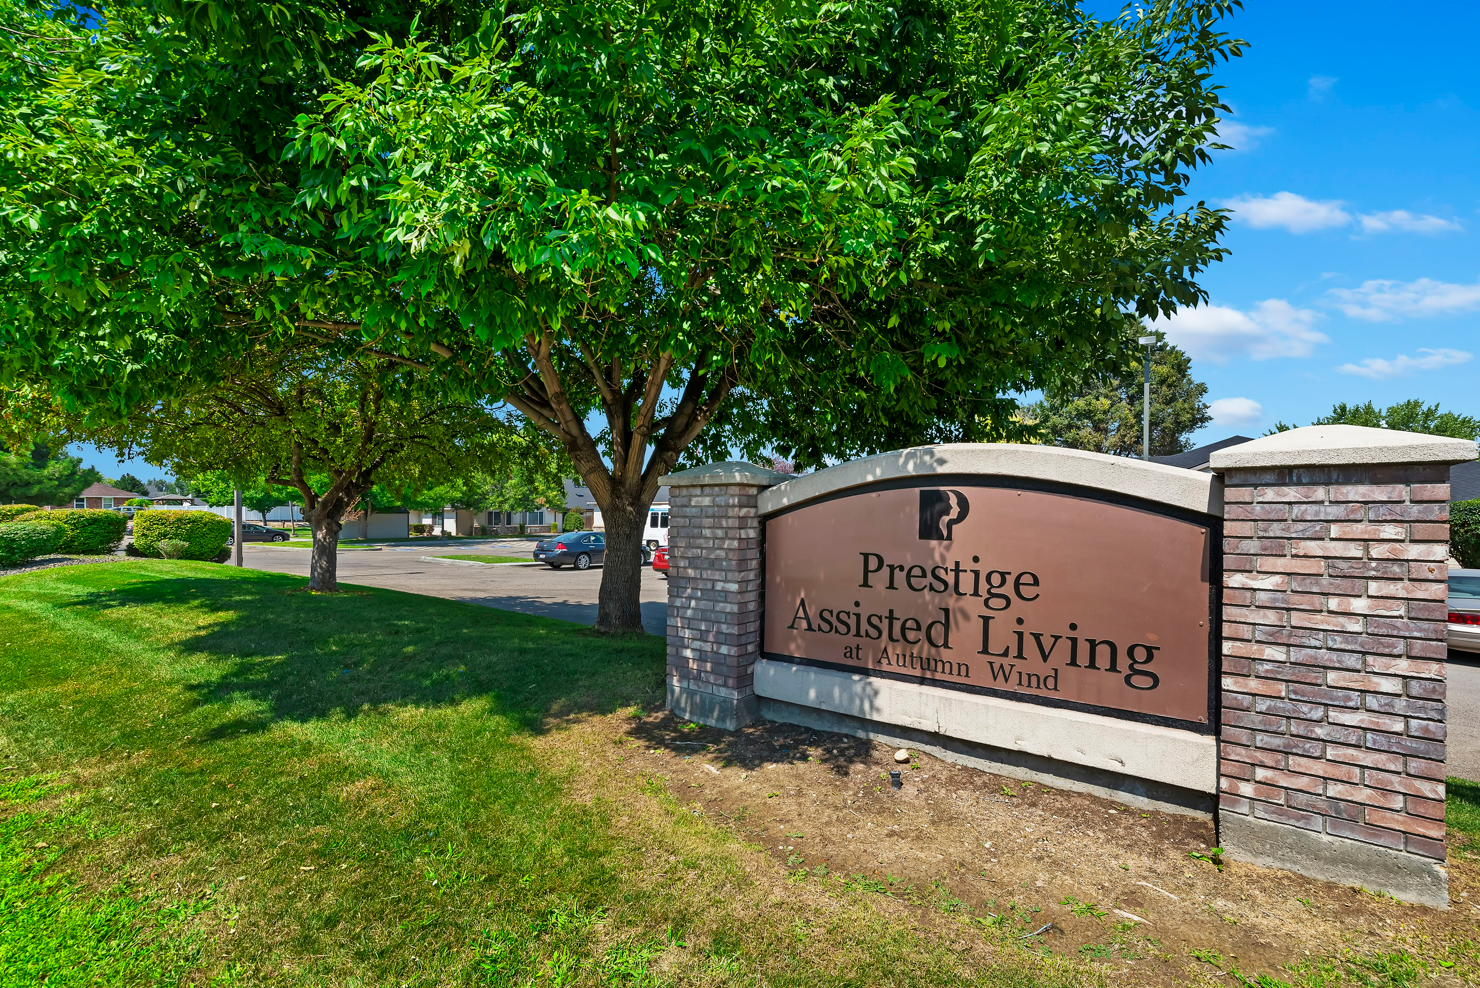 Prestige Assisted Living at Autumn Wind image